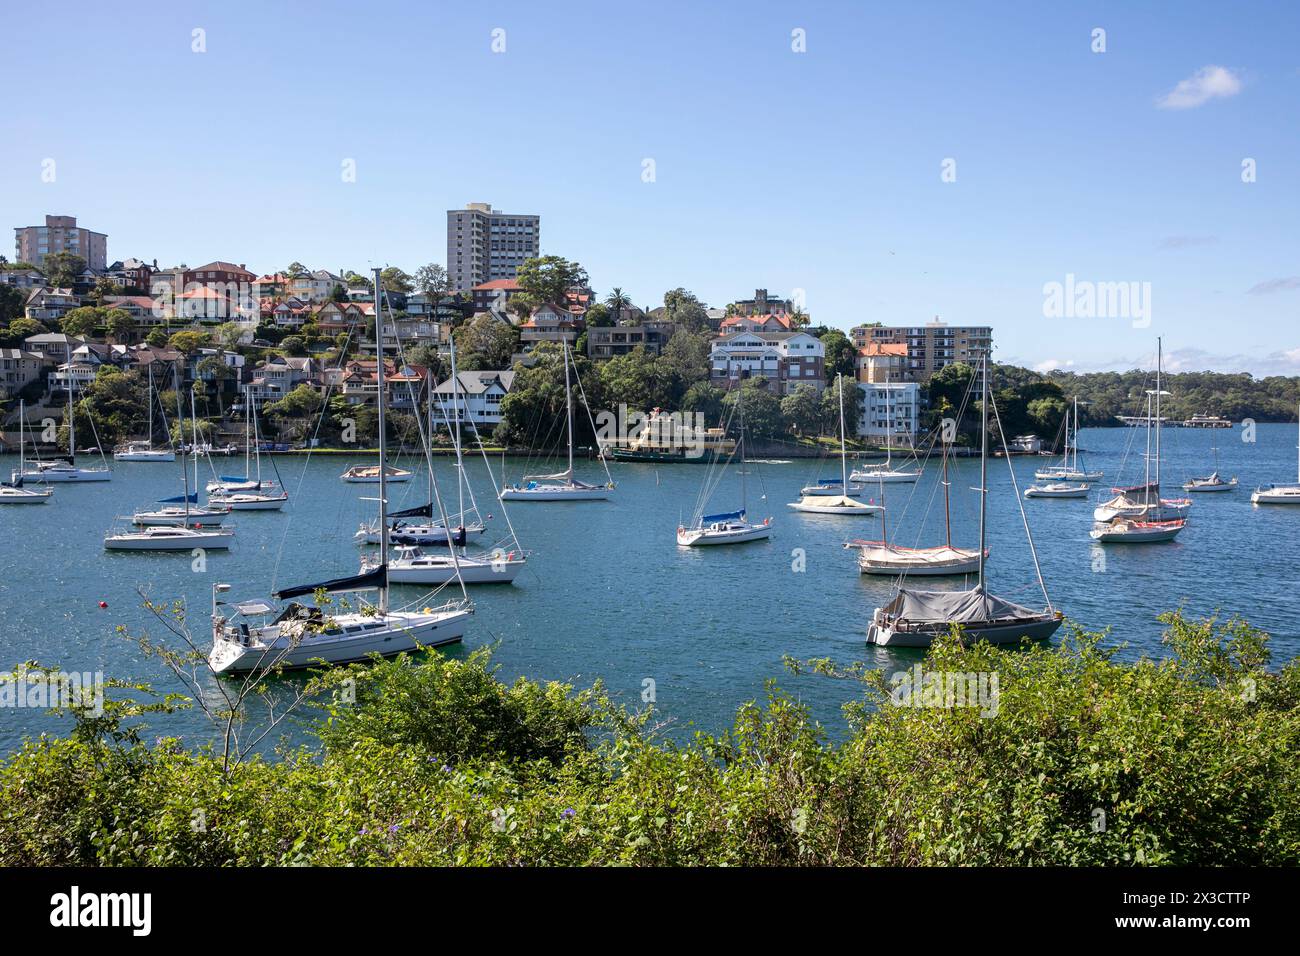 Mosman Bay on Sydney lower north shore, boats and sail yachts Moore din the bay, view from Cremorne point walk across the bay to South Mosman wharf Stock Photo